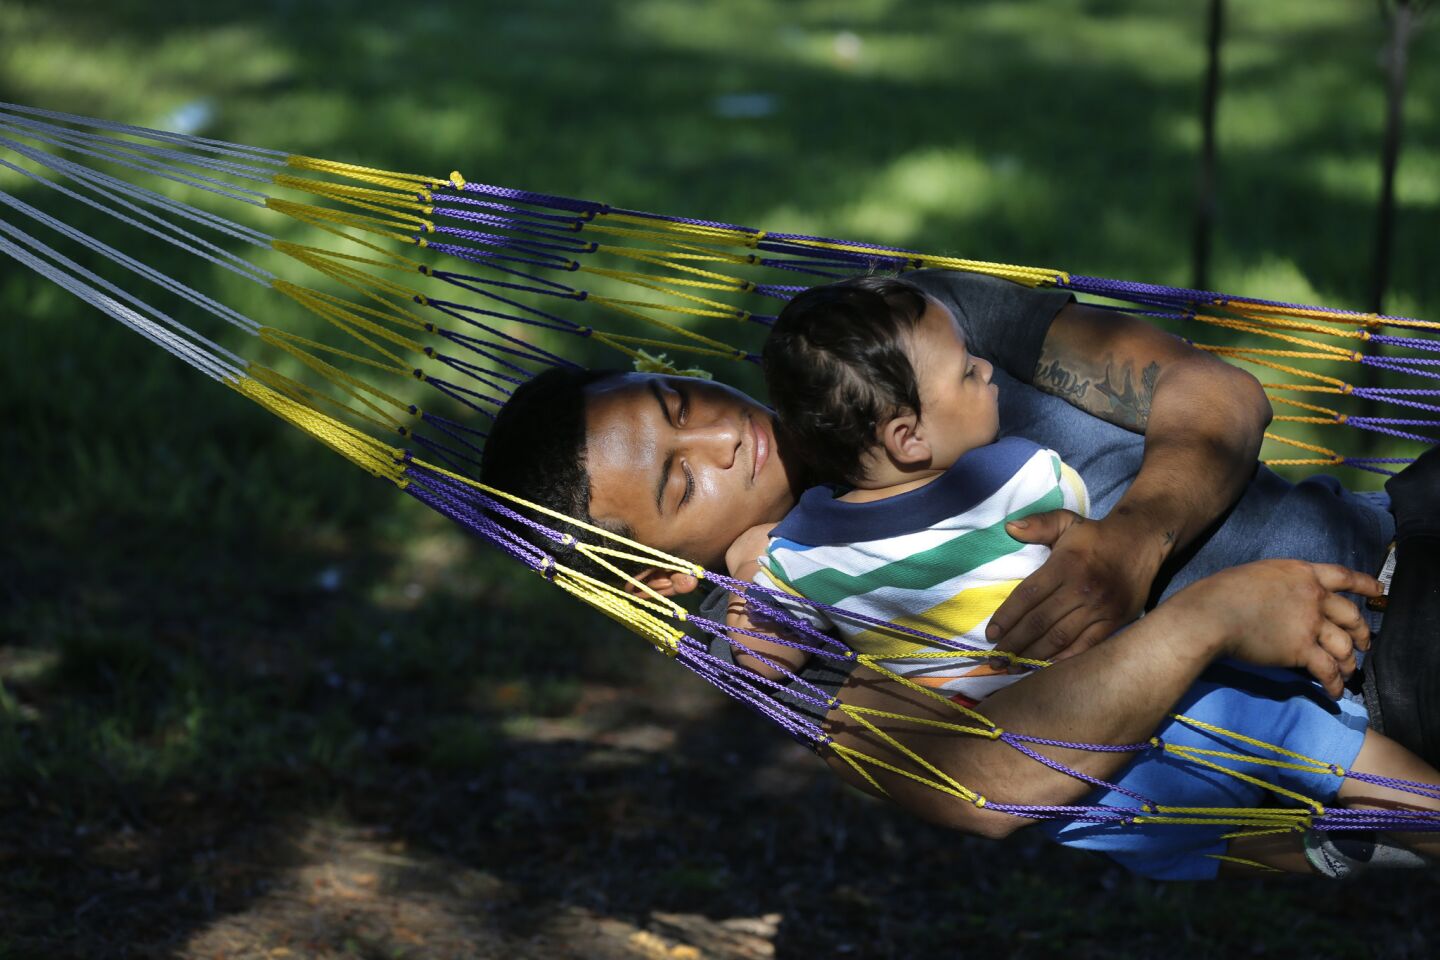 Luis Alvarez swings in a hammock with his 11-month-old son, Adrian Alvarez of Los Angeles, in the shade at Whittier Narrows Recreation Area.